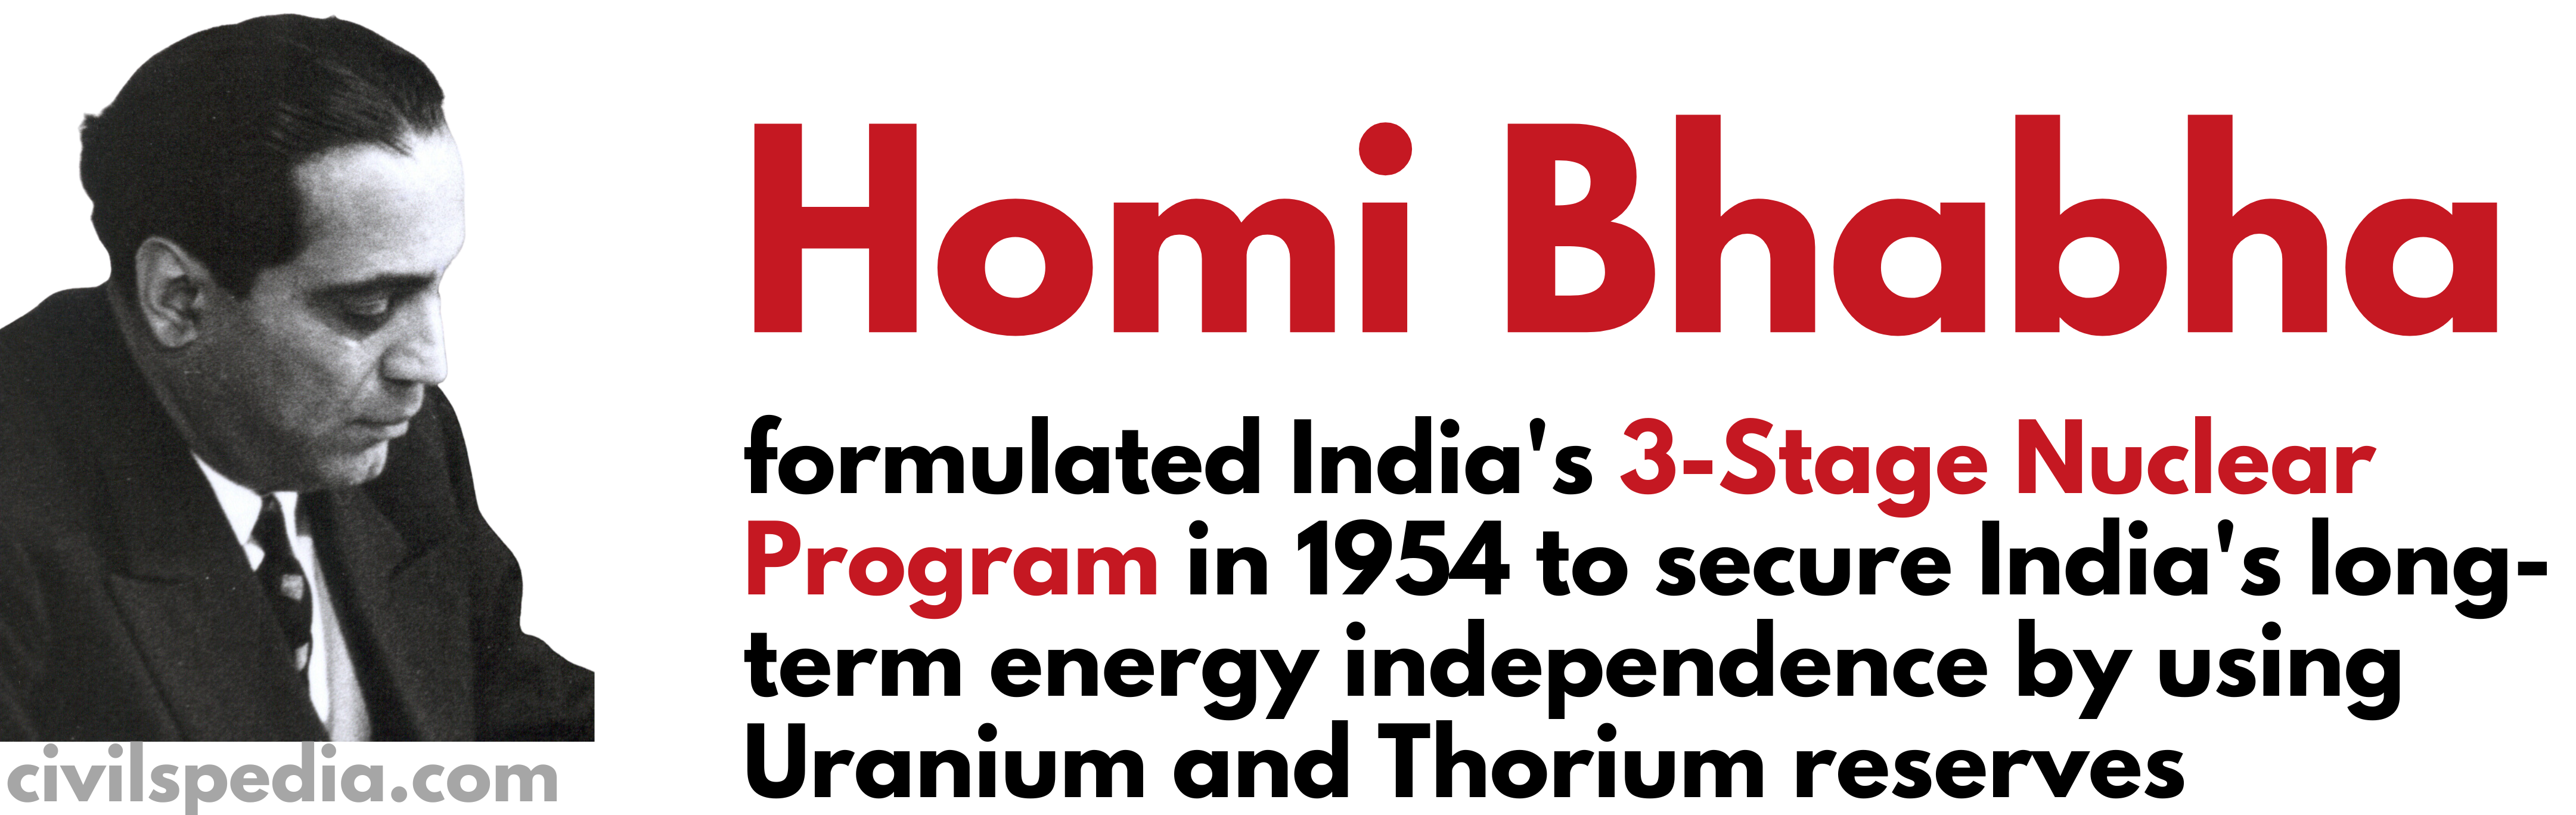 Indian Three Stage Nuclear Program